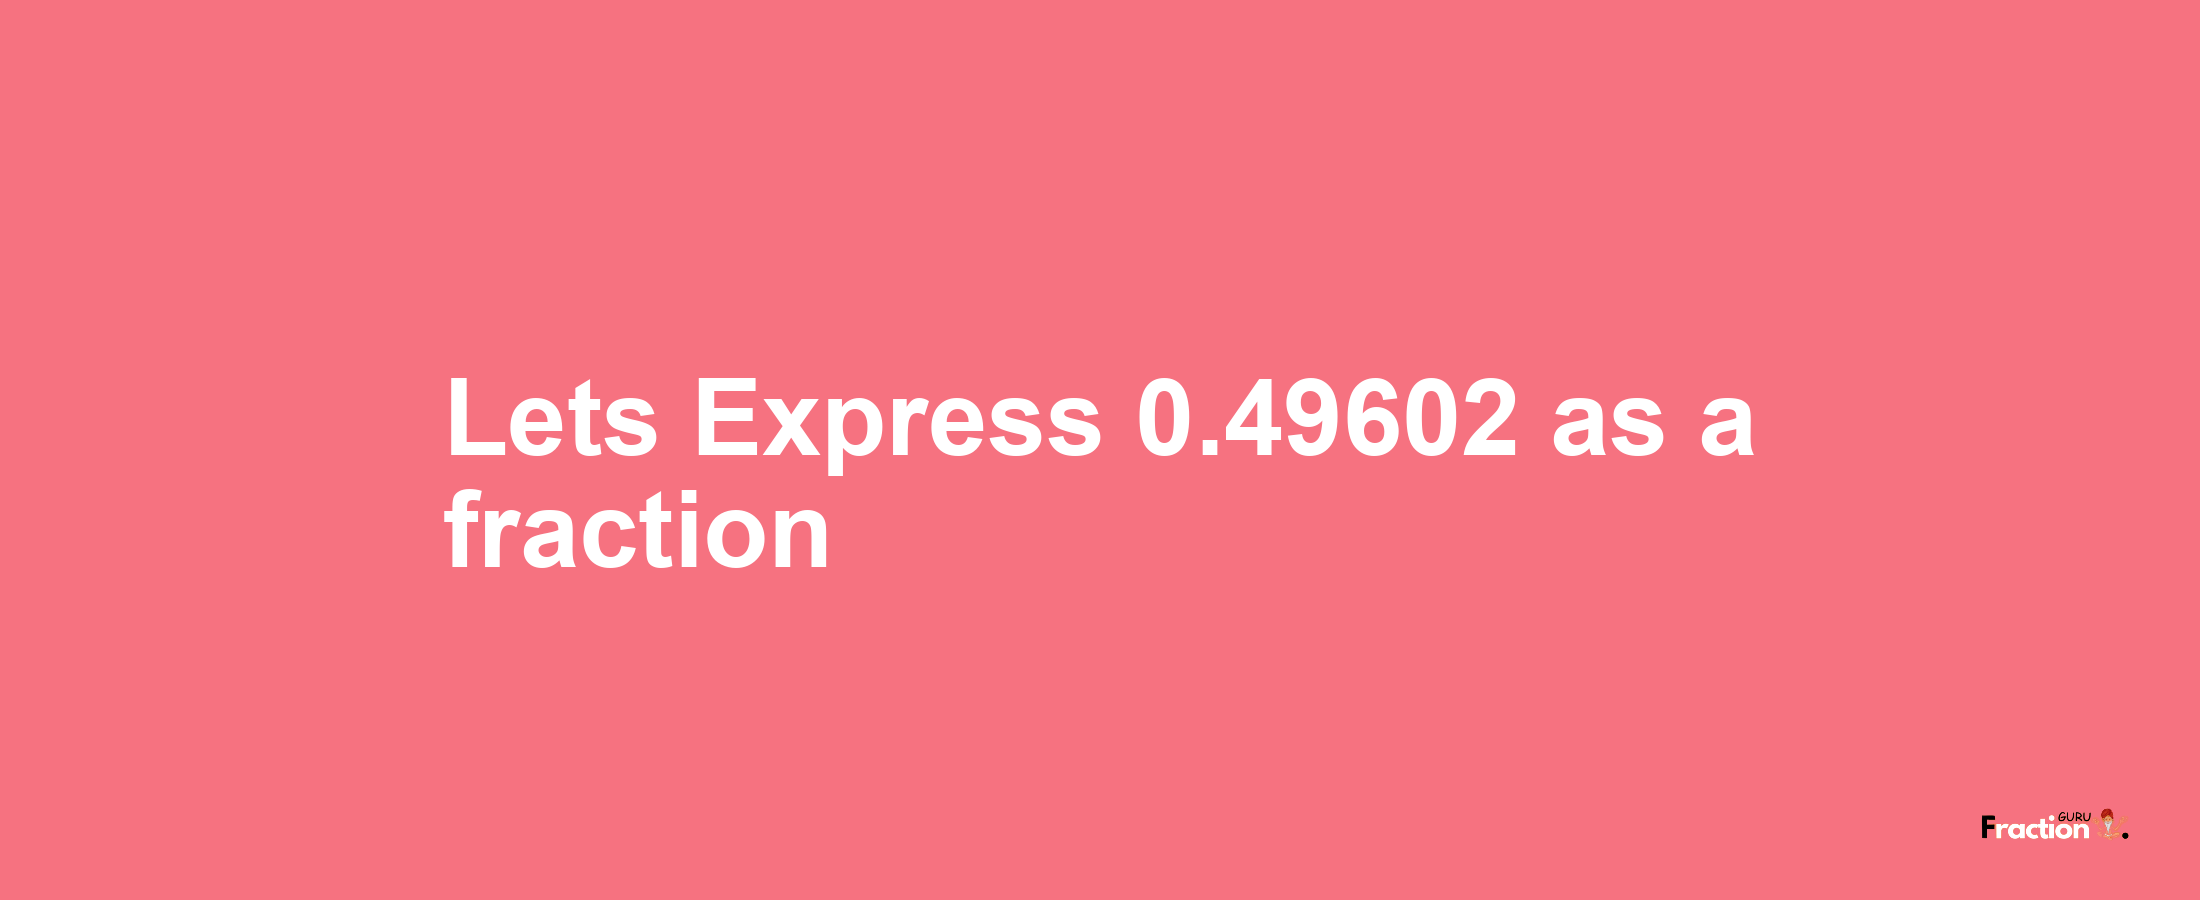 Lets Express 0.49602 as afraction